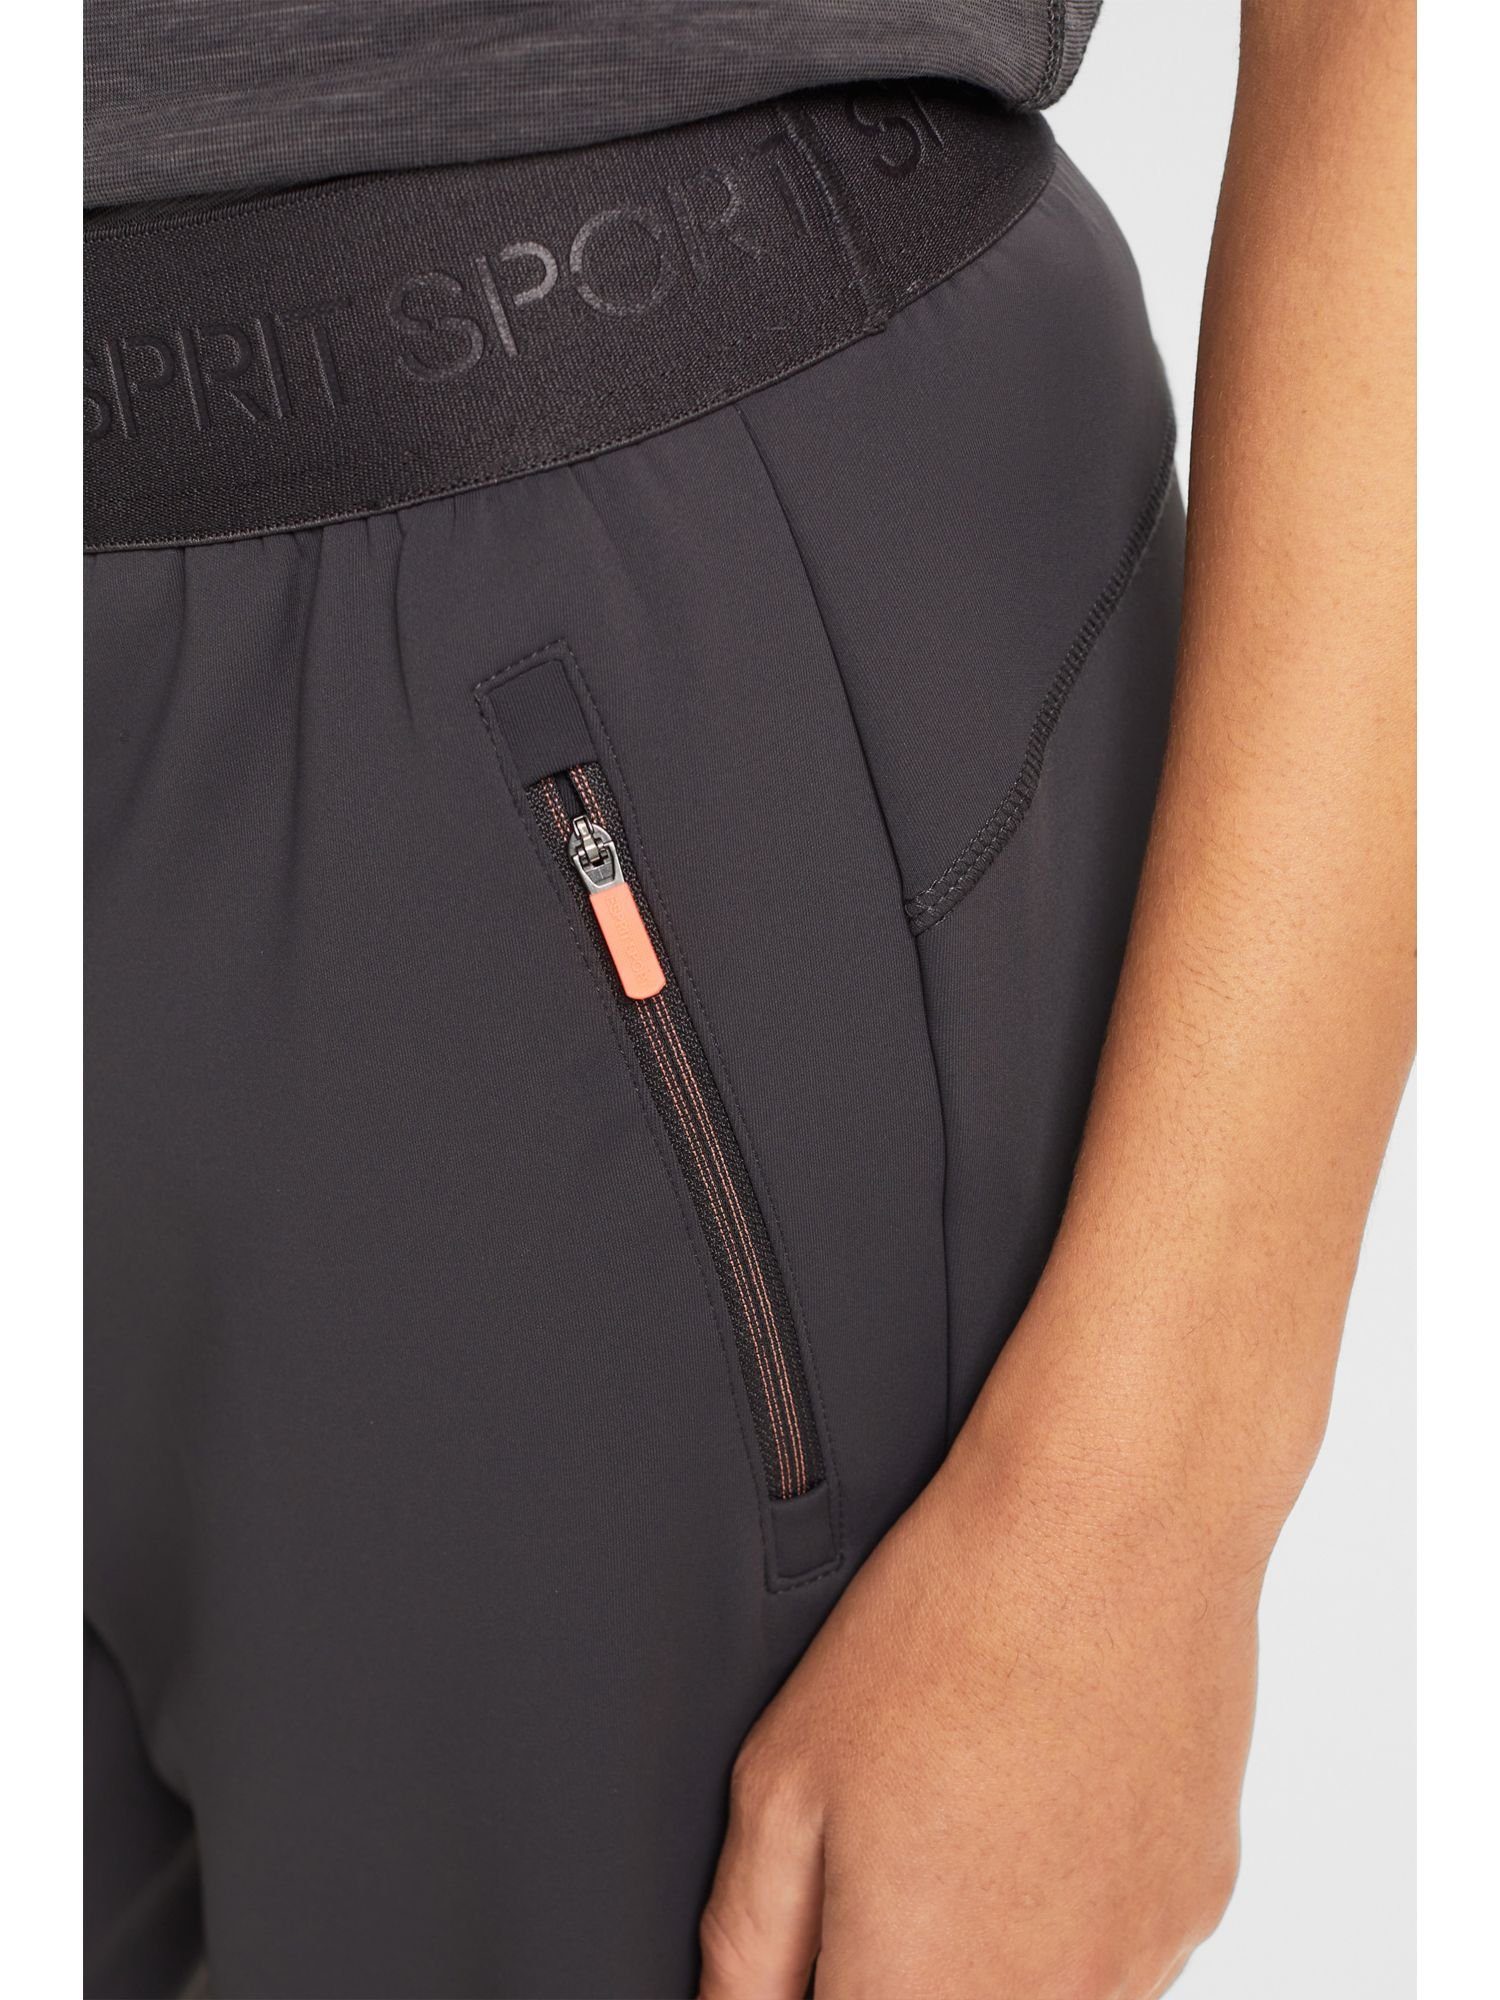 Recycled: ANTHRACITE Sporthose Active-Hose sports esprit